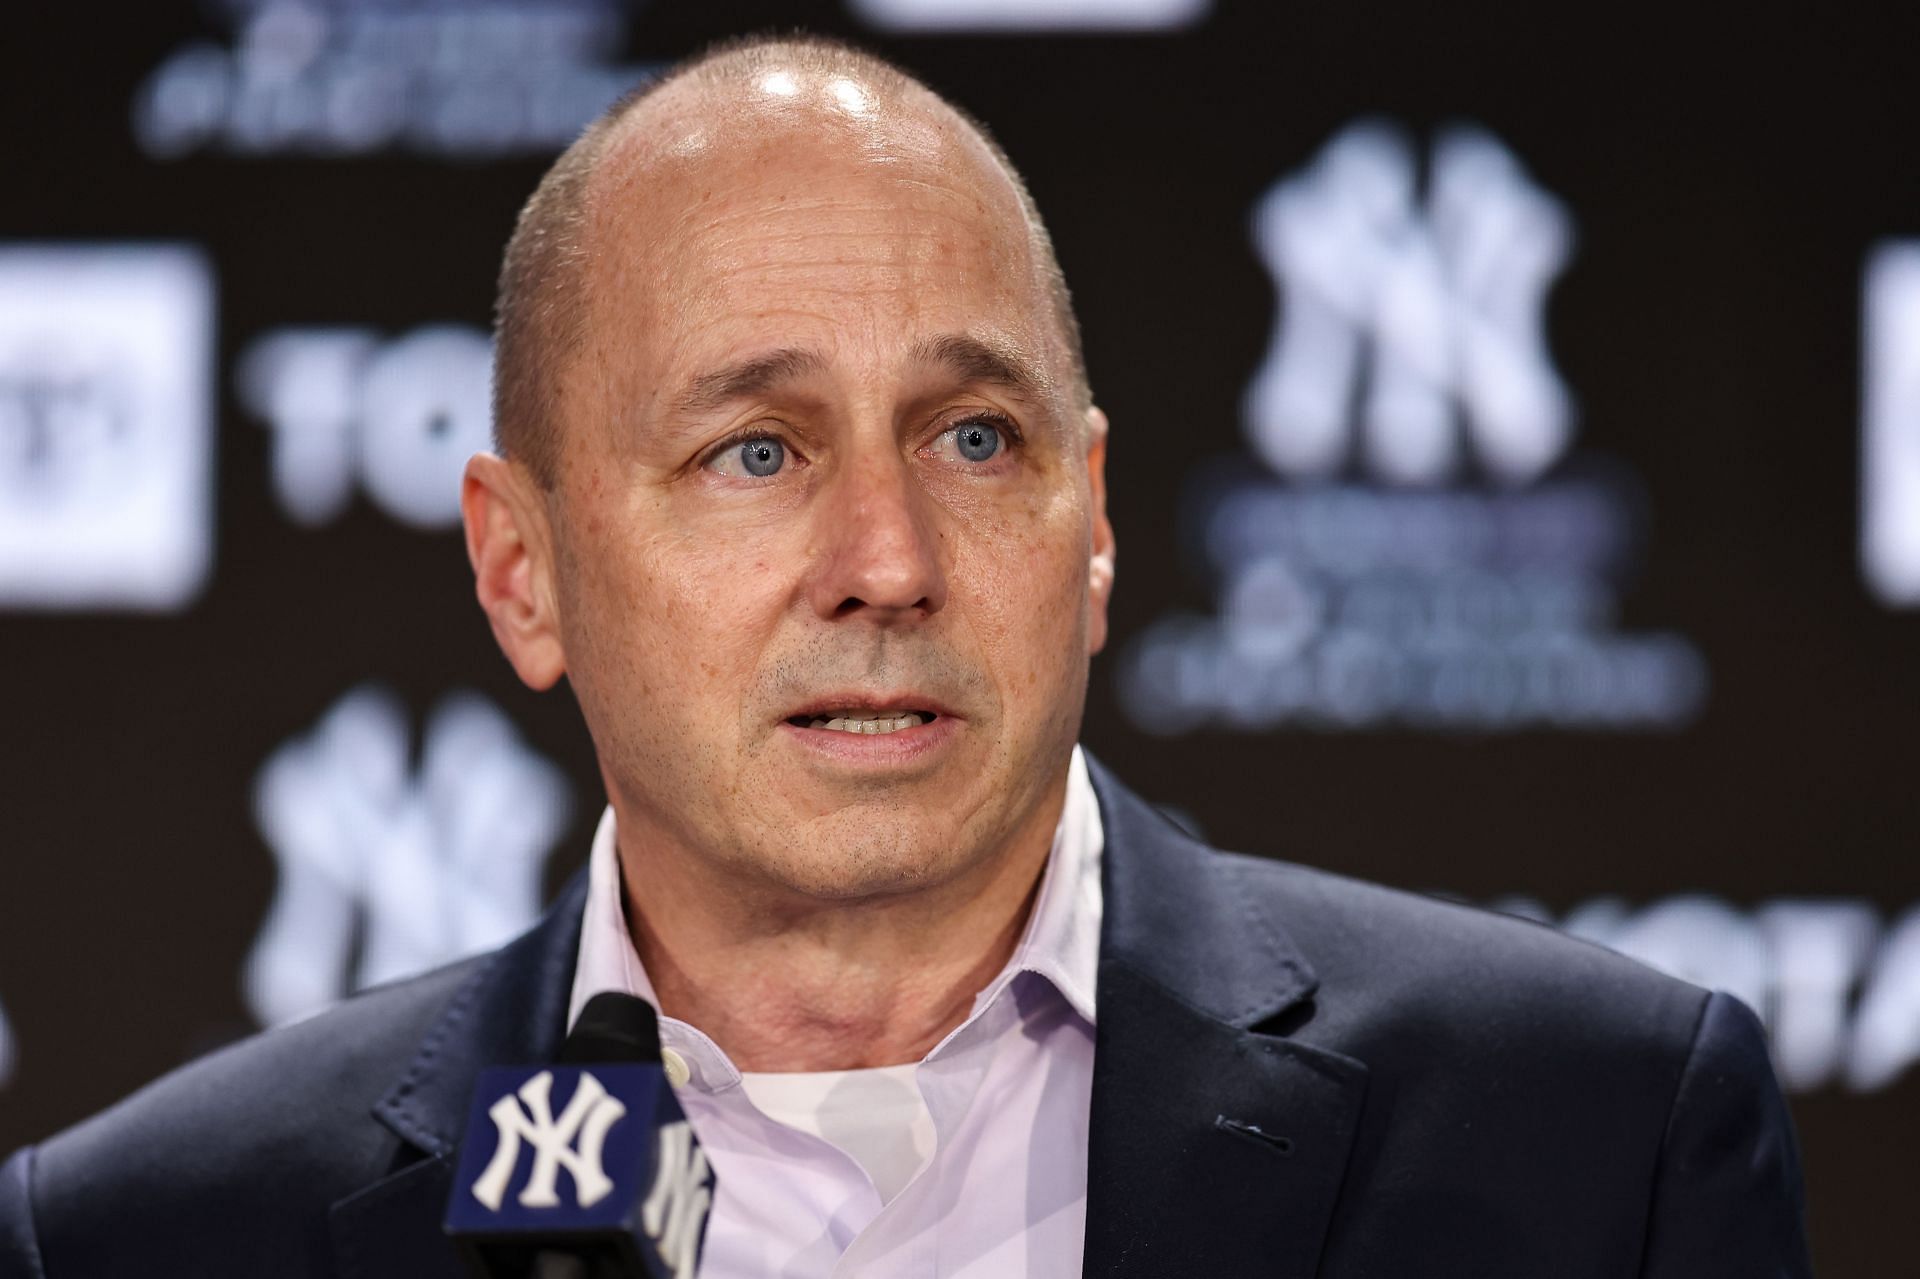 New York Yankee general manager Brian Cashman speaks to the media during a press conference at Yankee Stadium